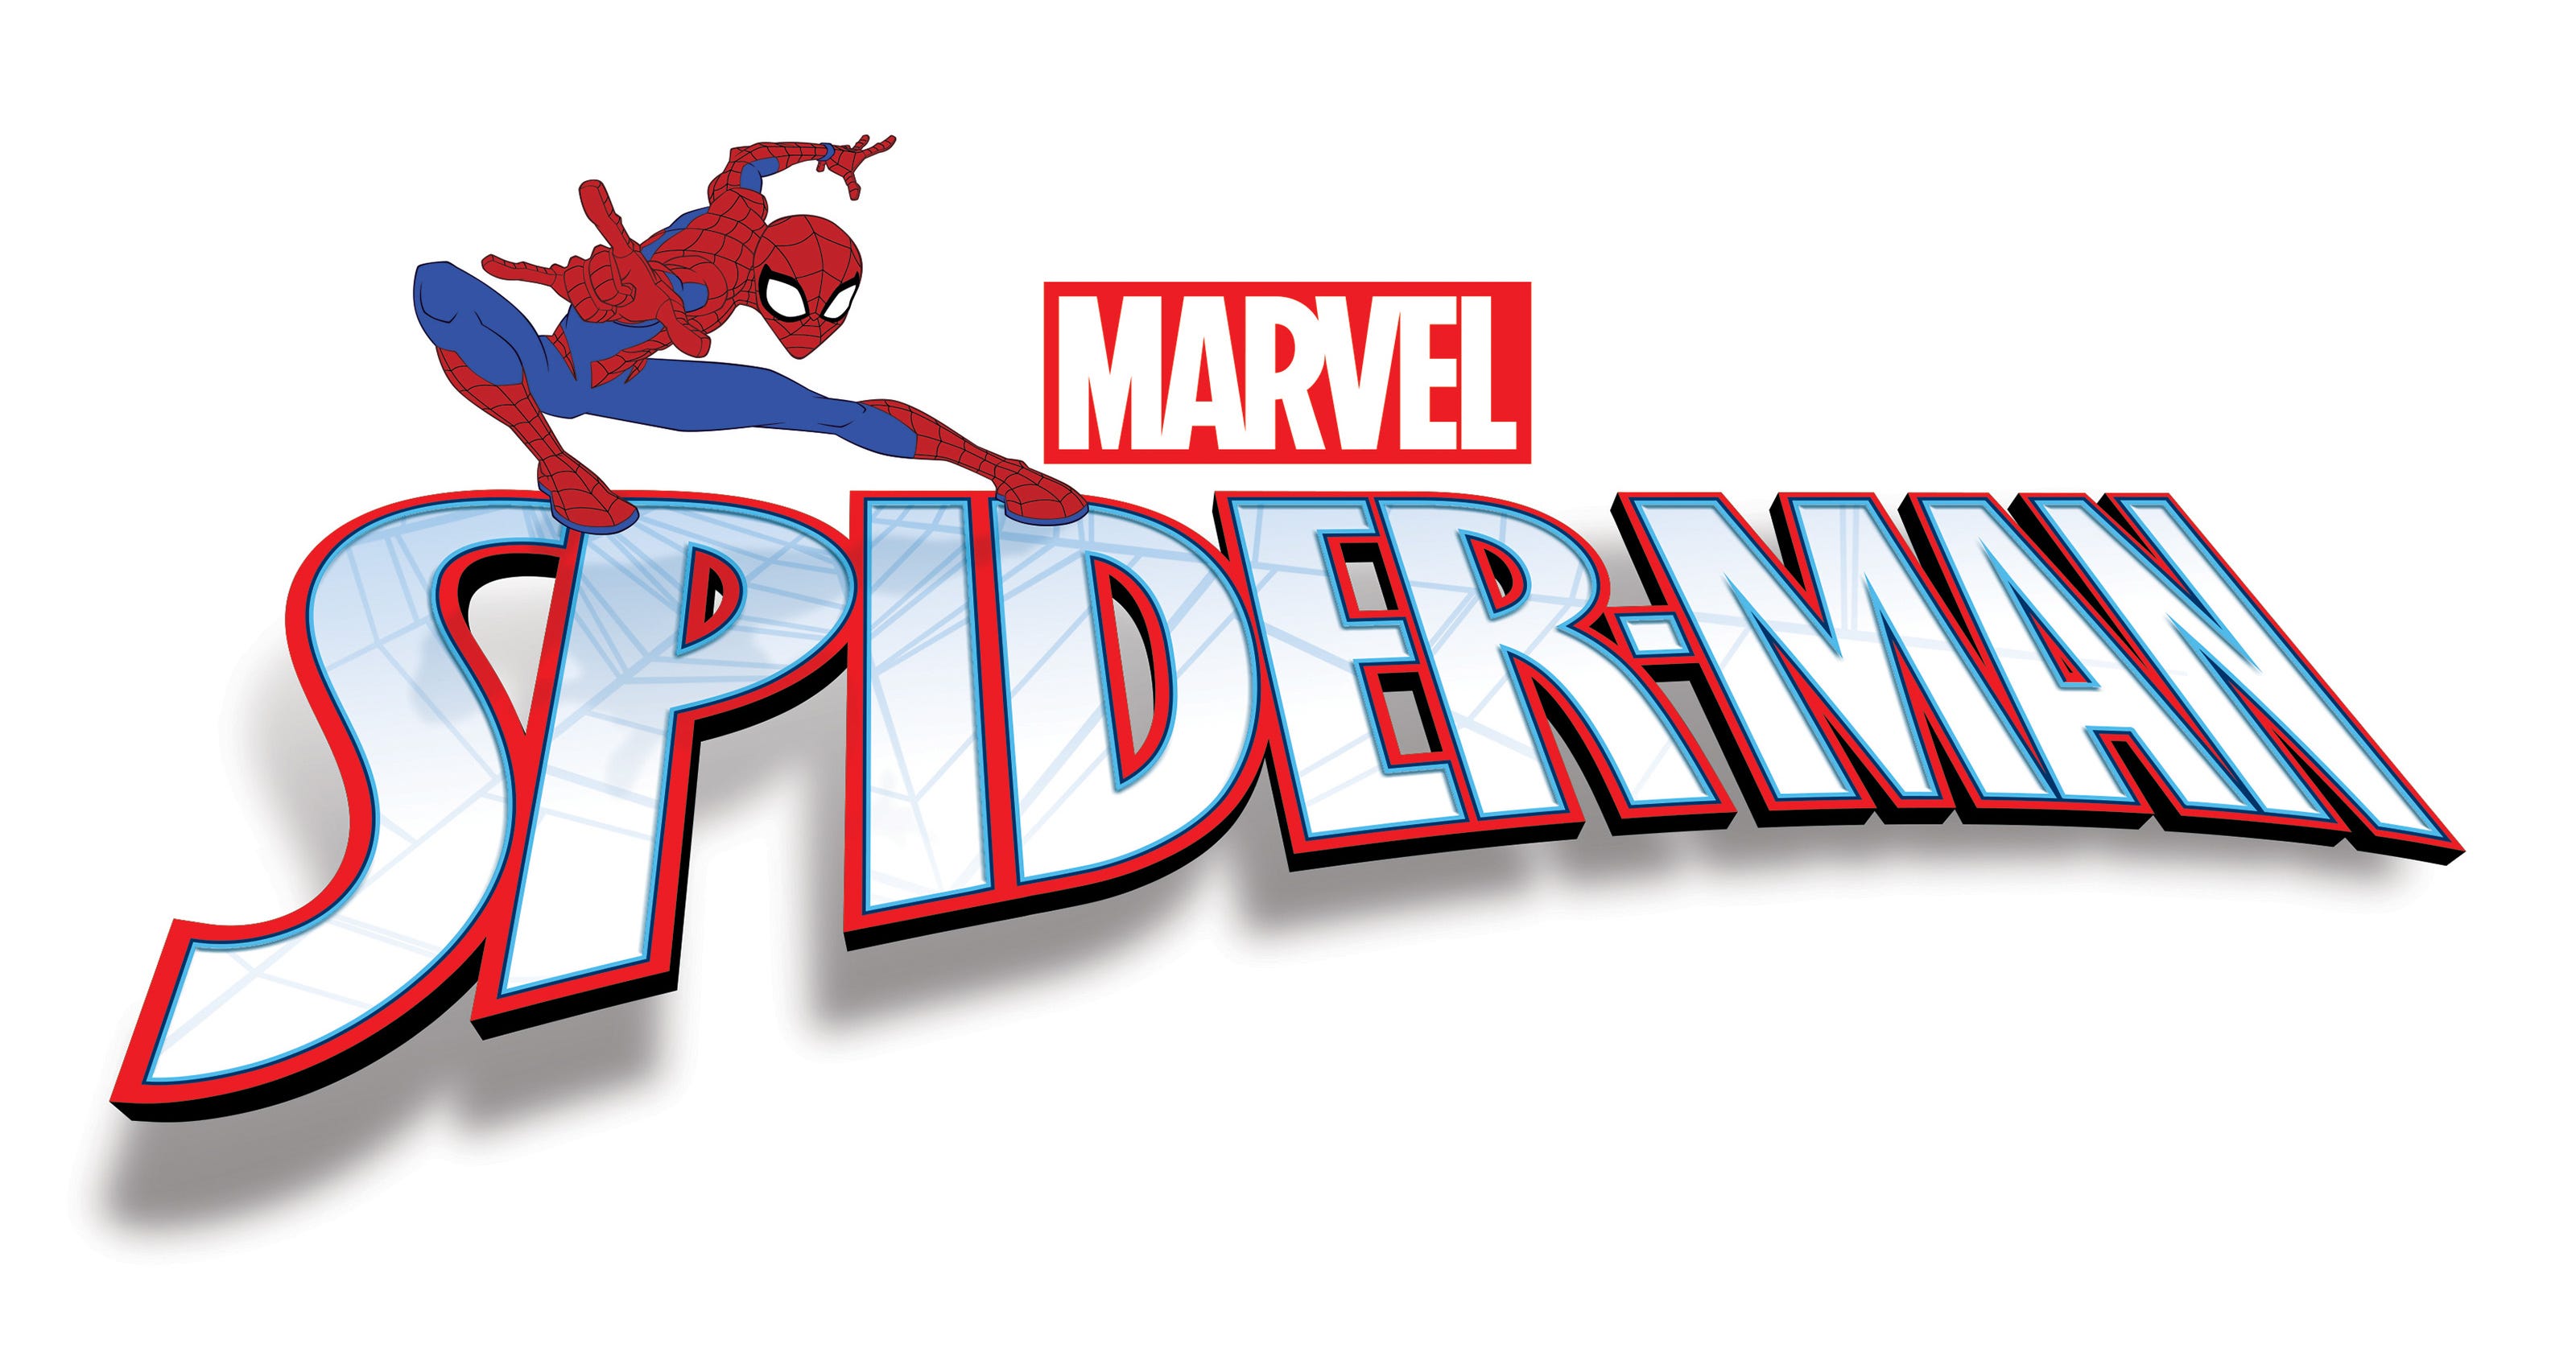 Exclusive New 'SpiderMan' animated series coming in 2017